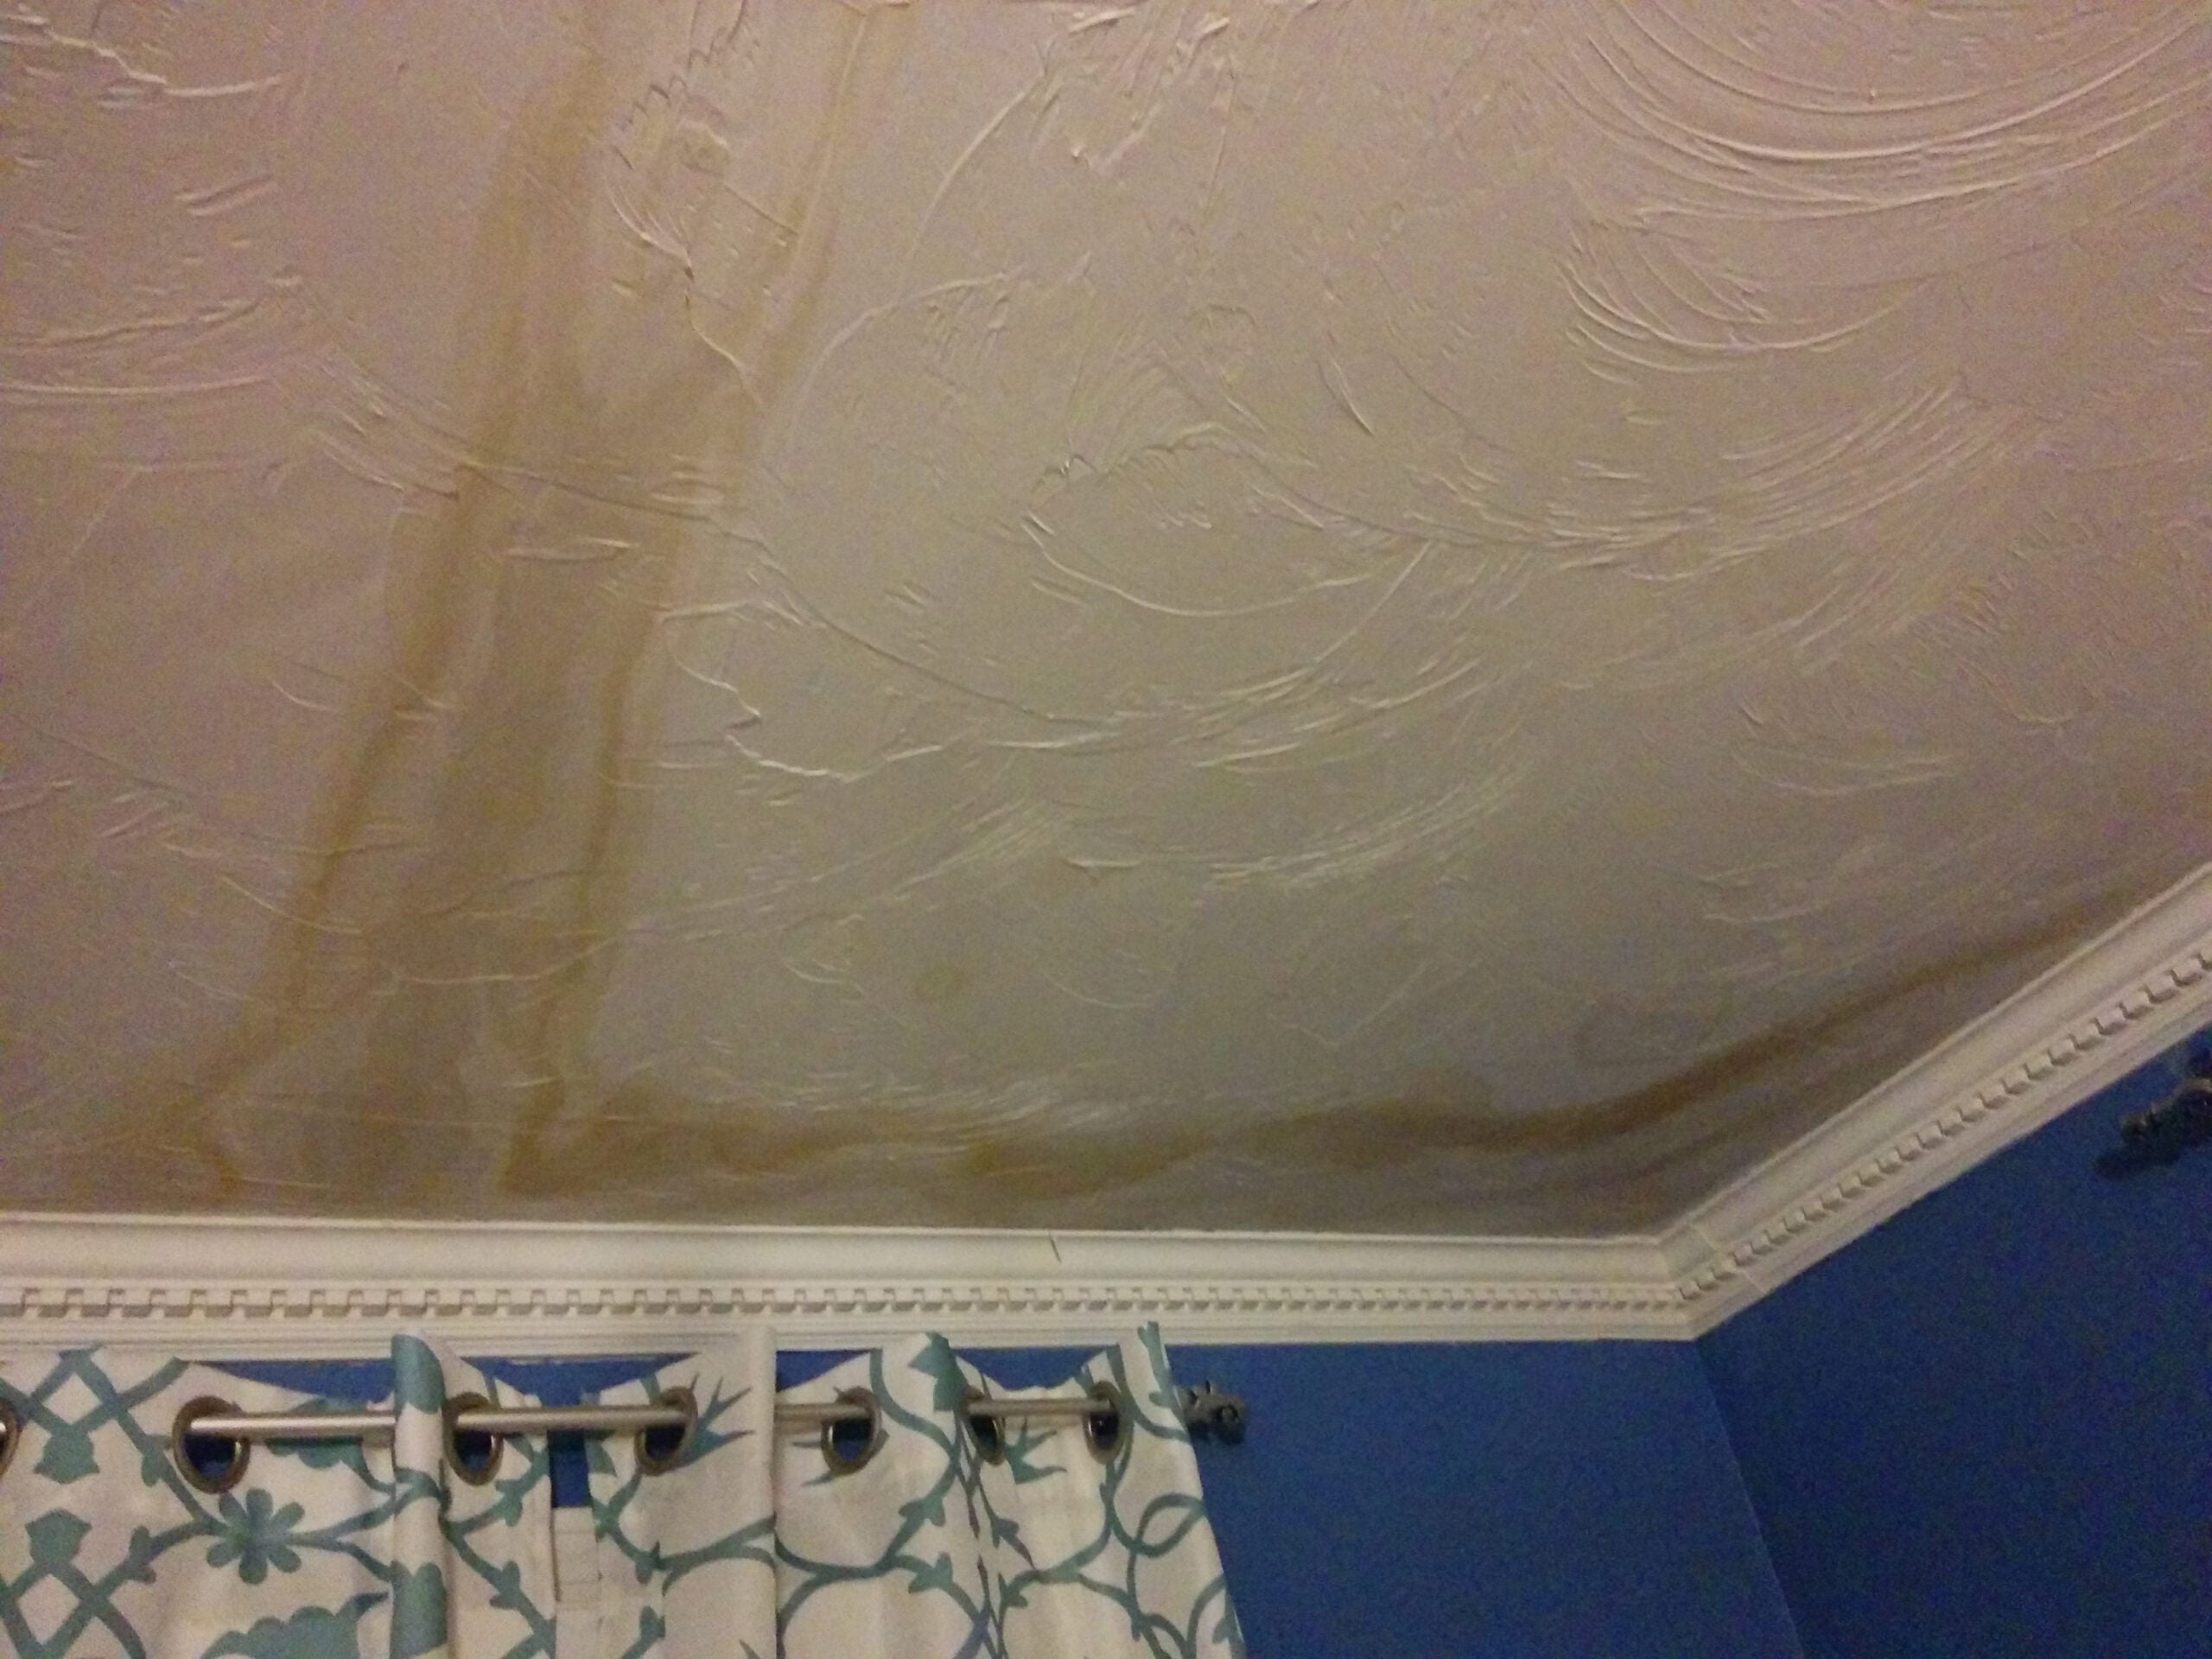 How To Advice On Wet Walls Ceilings